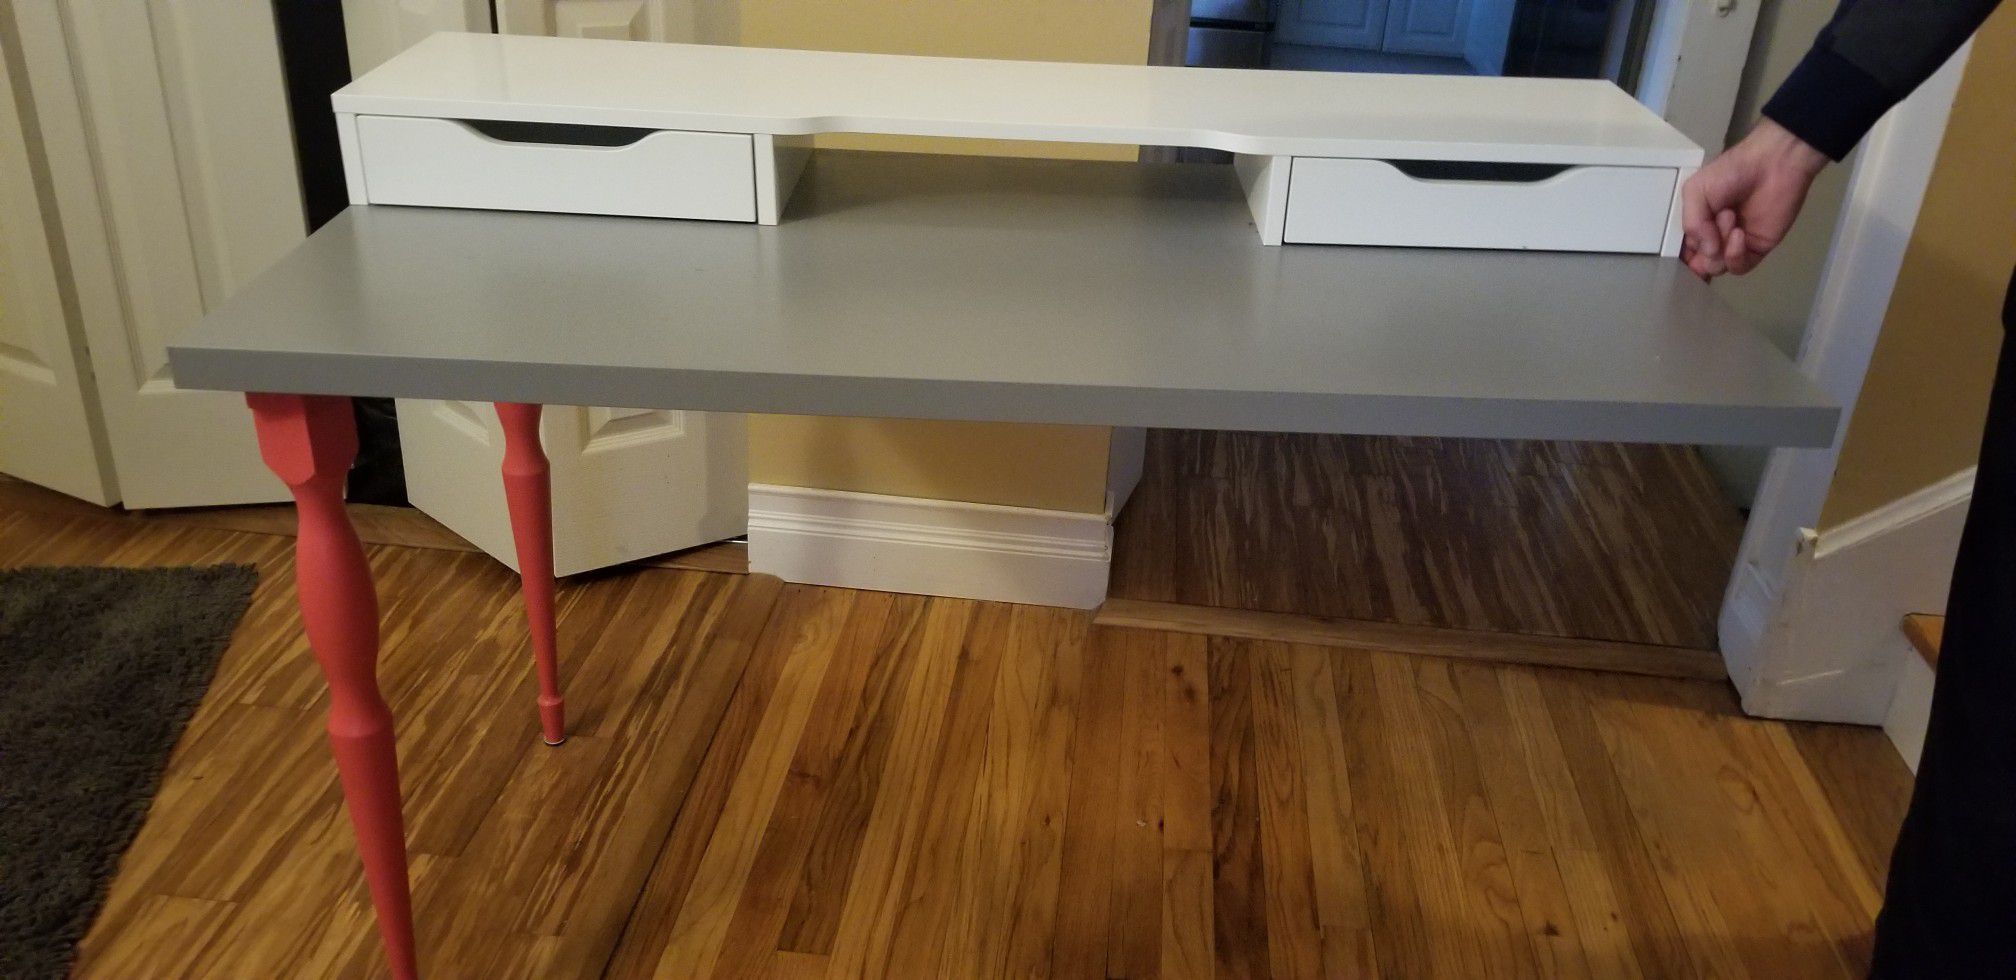 Ikea desk (2 legs, drey top, and white store top)